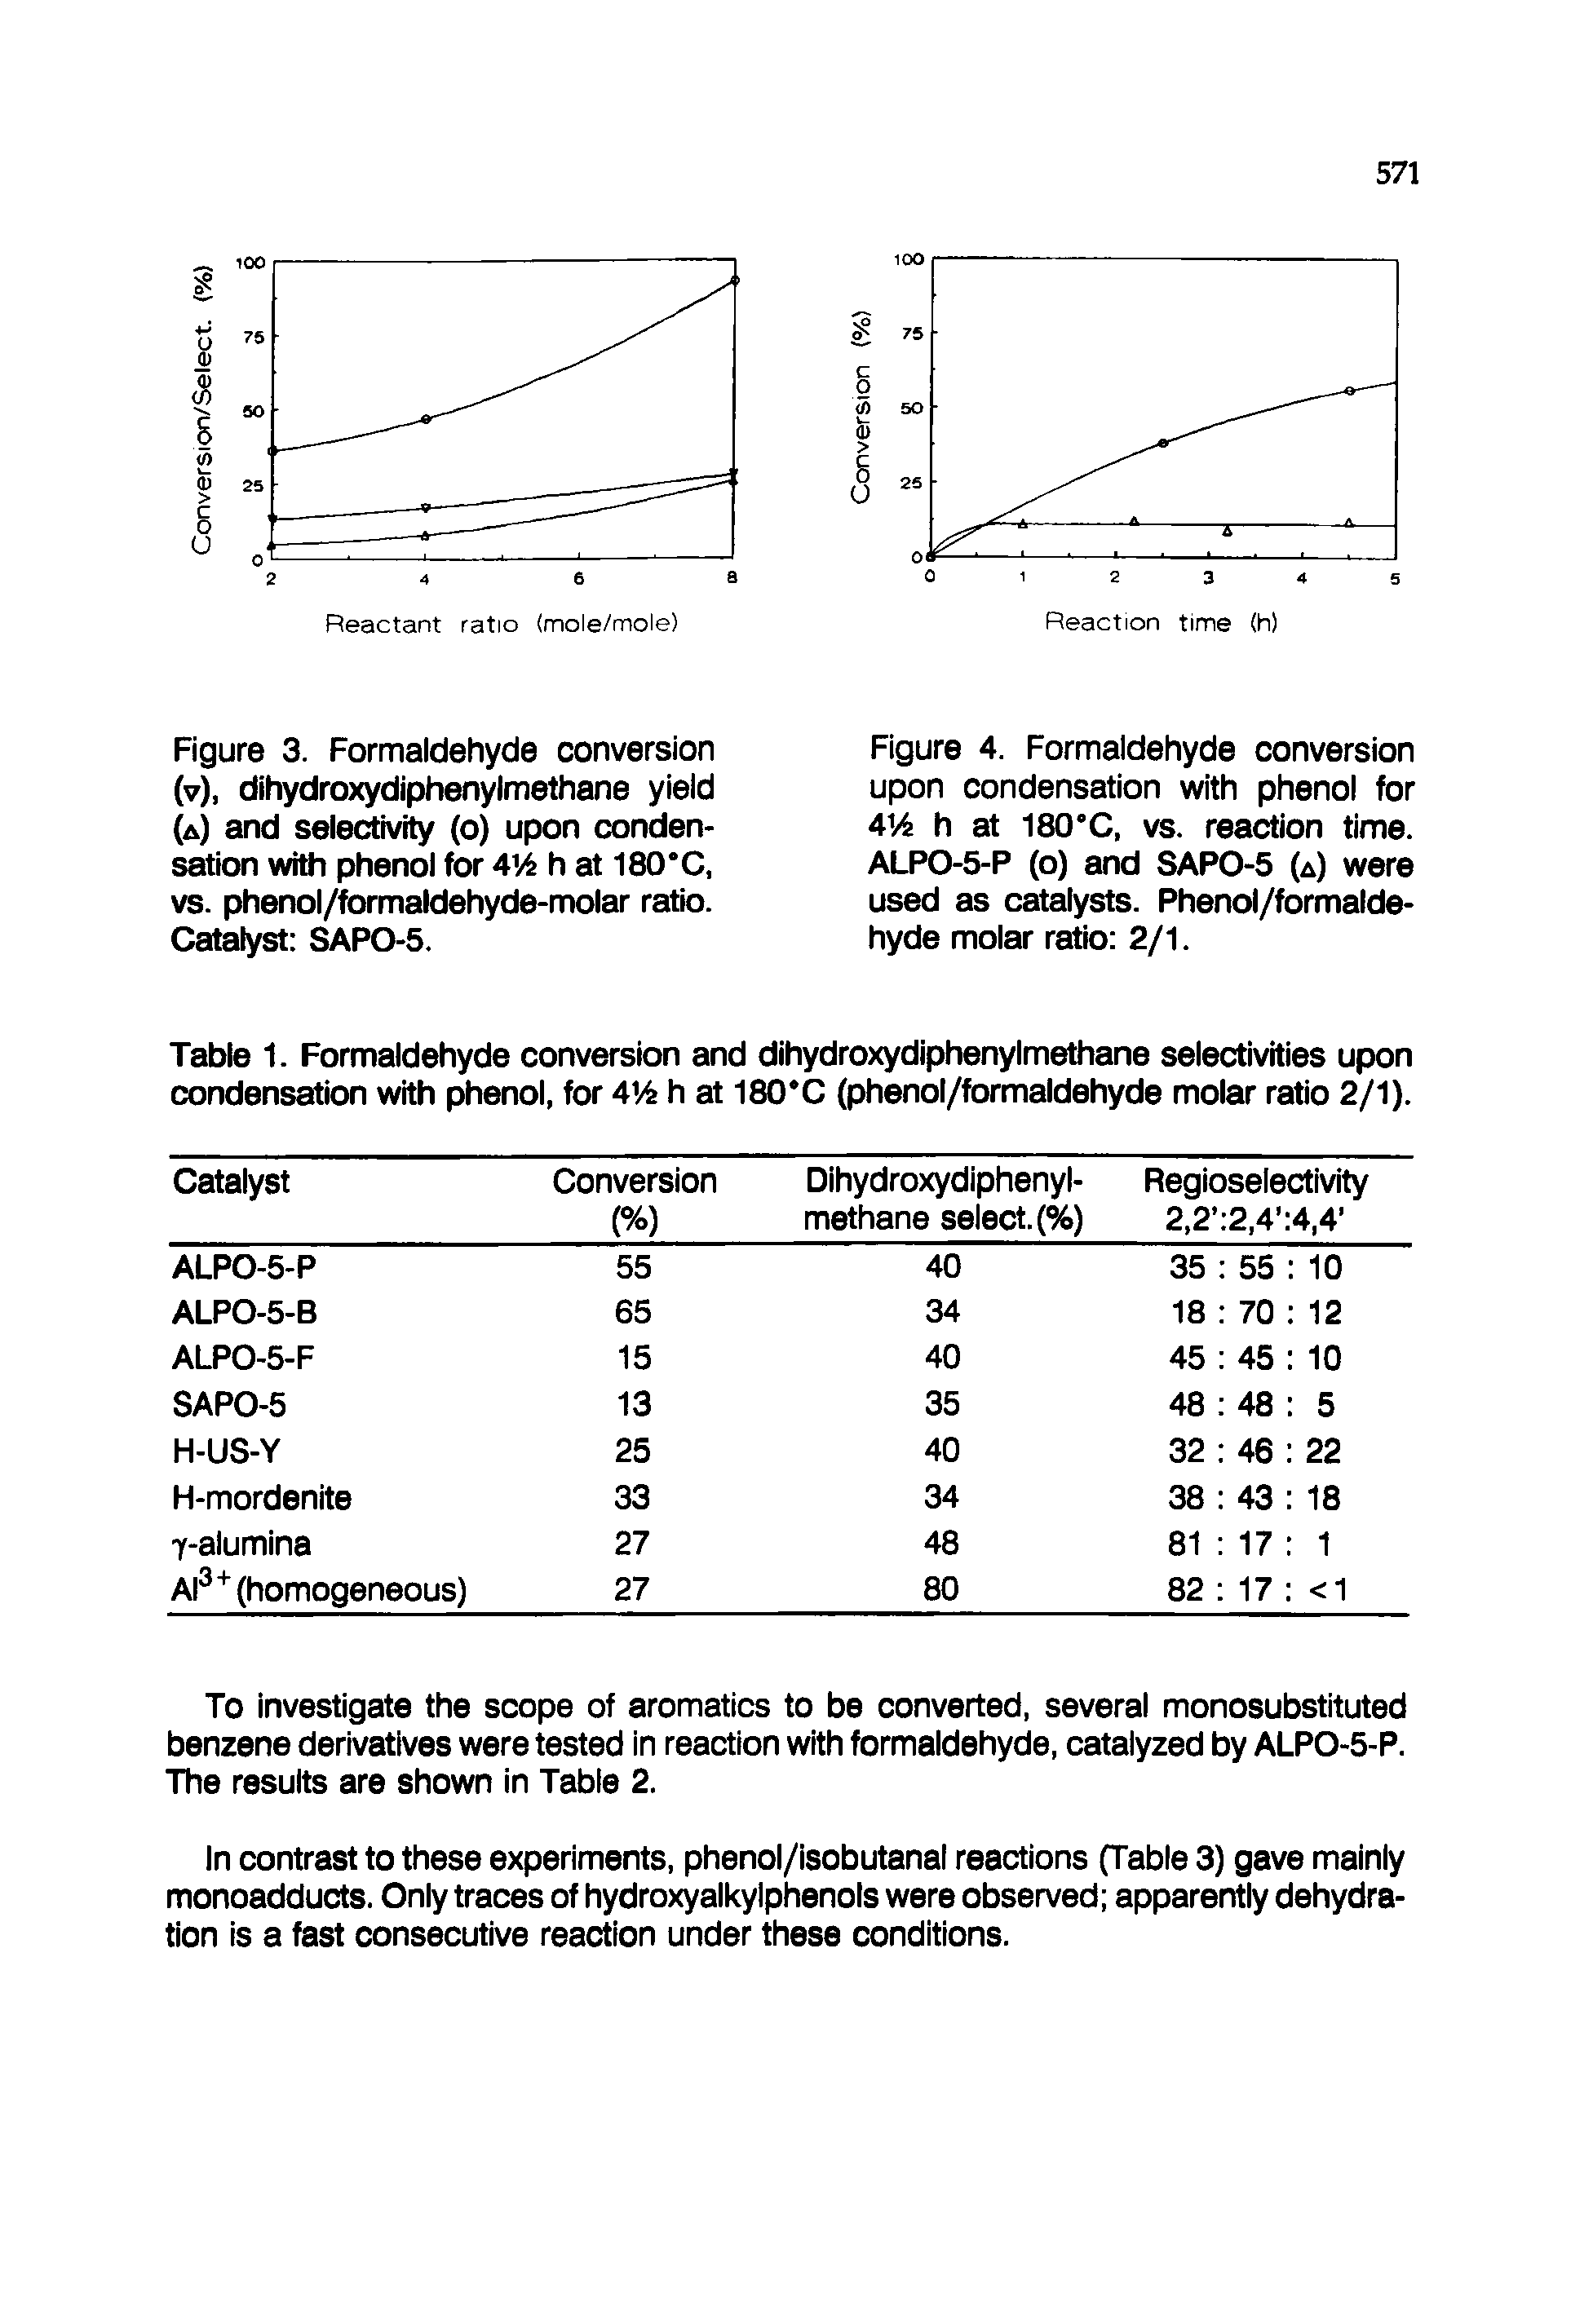 Figure 4. Formaldehyde conversion upon condensation with phenol for 4V4 h at 180 C, vs. reaction time. ALPO-5-P (o) and SAPO-5 (a) were used as catalysts. Phenol/formalde-hyde molar ratio 2/1.